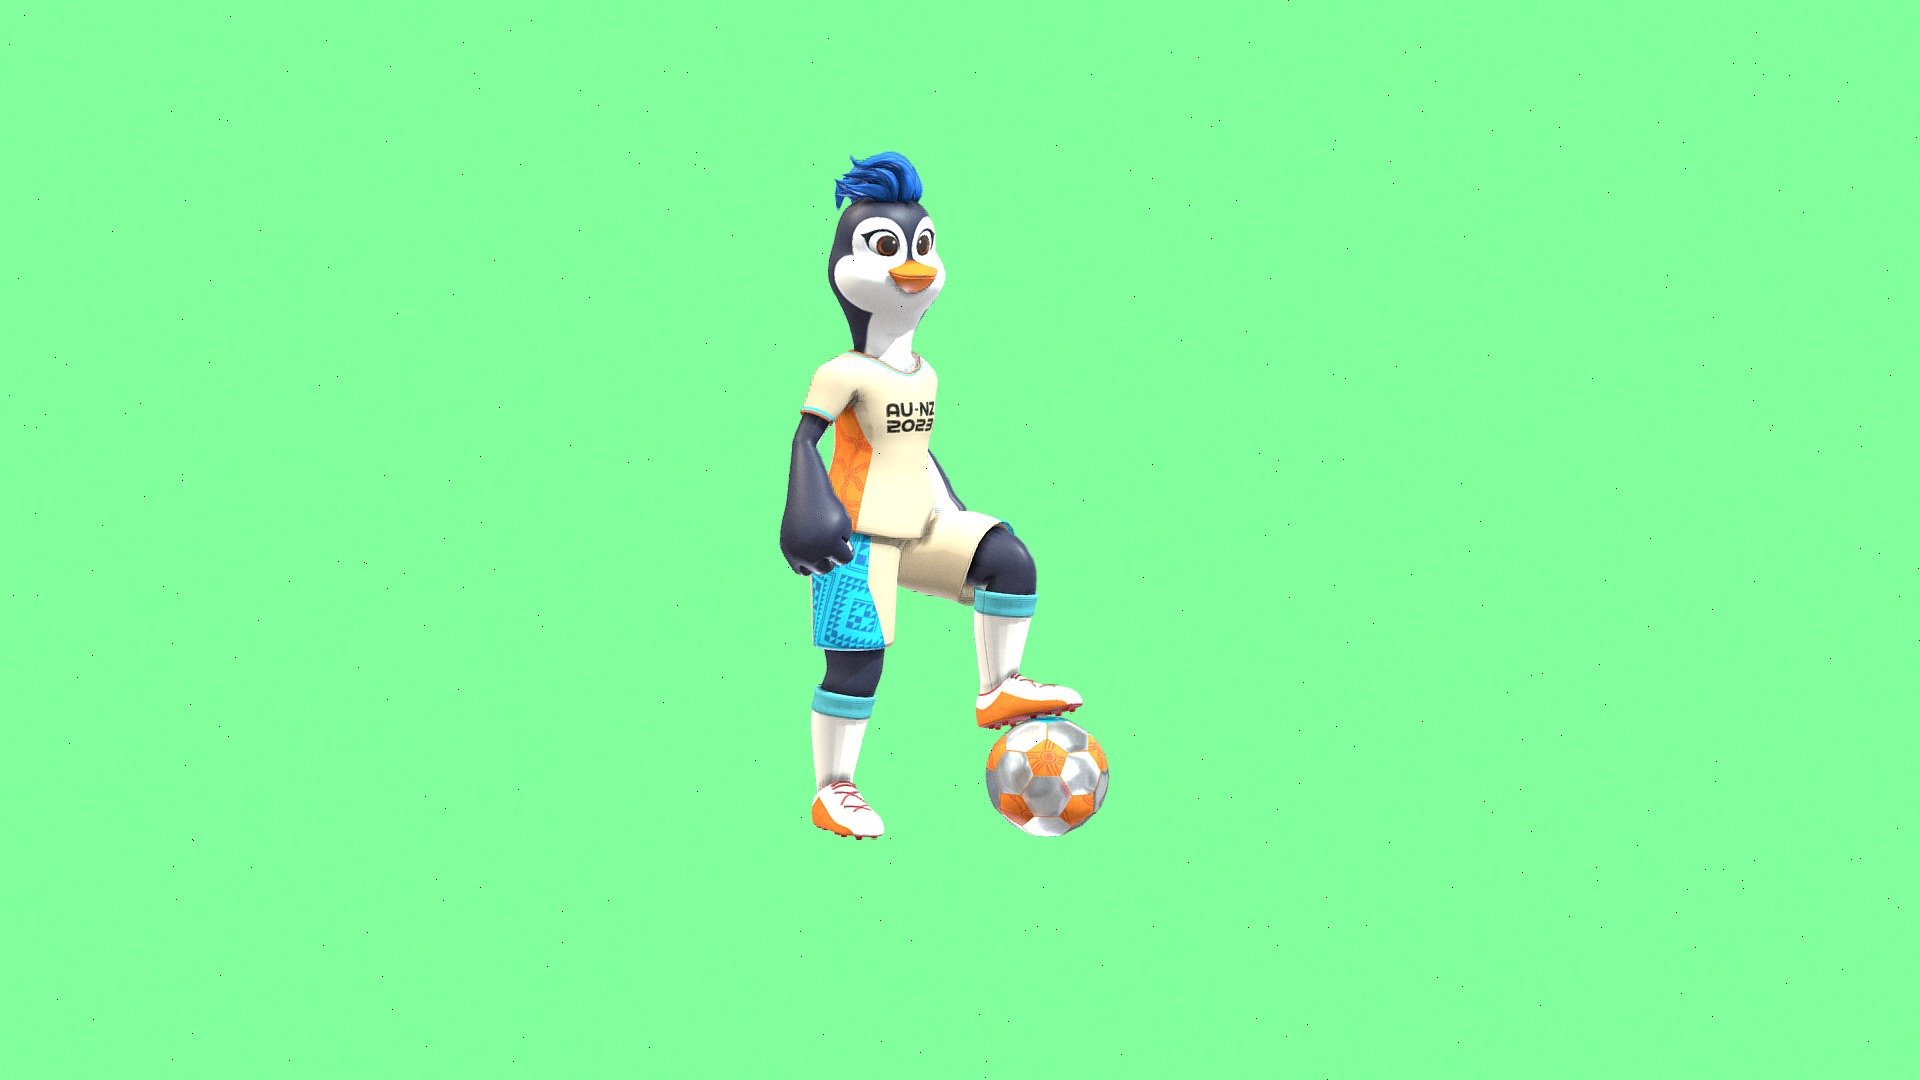 Tazuni is a penguin based on the Eudyptula minor species which is endemic to New Zealand, with the closely related Eudyptula novaehollandiae species found in Australia and New Zealand.

According to FIFA, the new mascot is a 15-year-old midfielder, who fell in love with football after playing the game on the beach one day. 

Her name is the combination of the &lsquo;Tasman Sea', which separates Australia and New Zealand, and &lsquo;unity'. 

&ldquo;Tazuni stands for everything which makes the Women's World Cup unique, and her story will resonate with millions of young fans around the world,